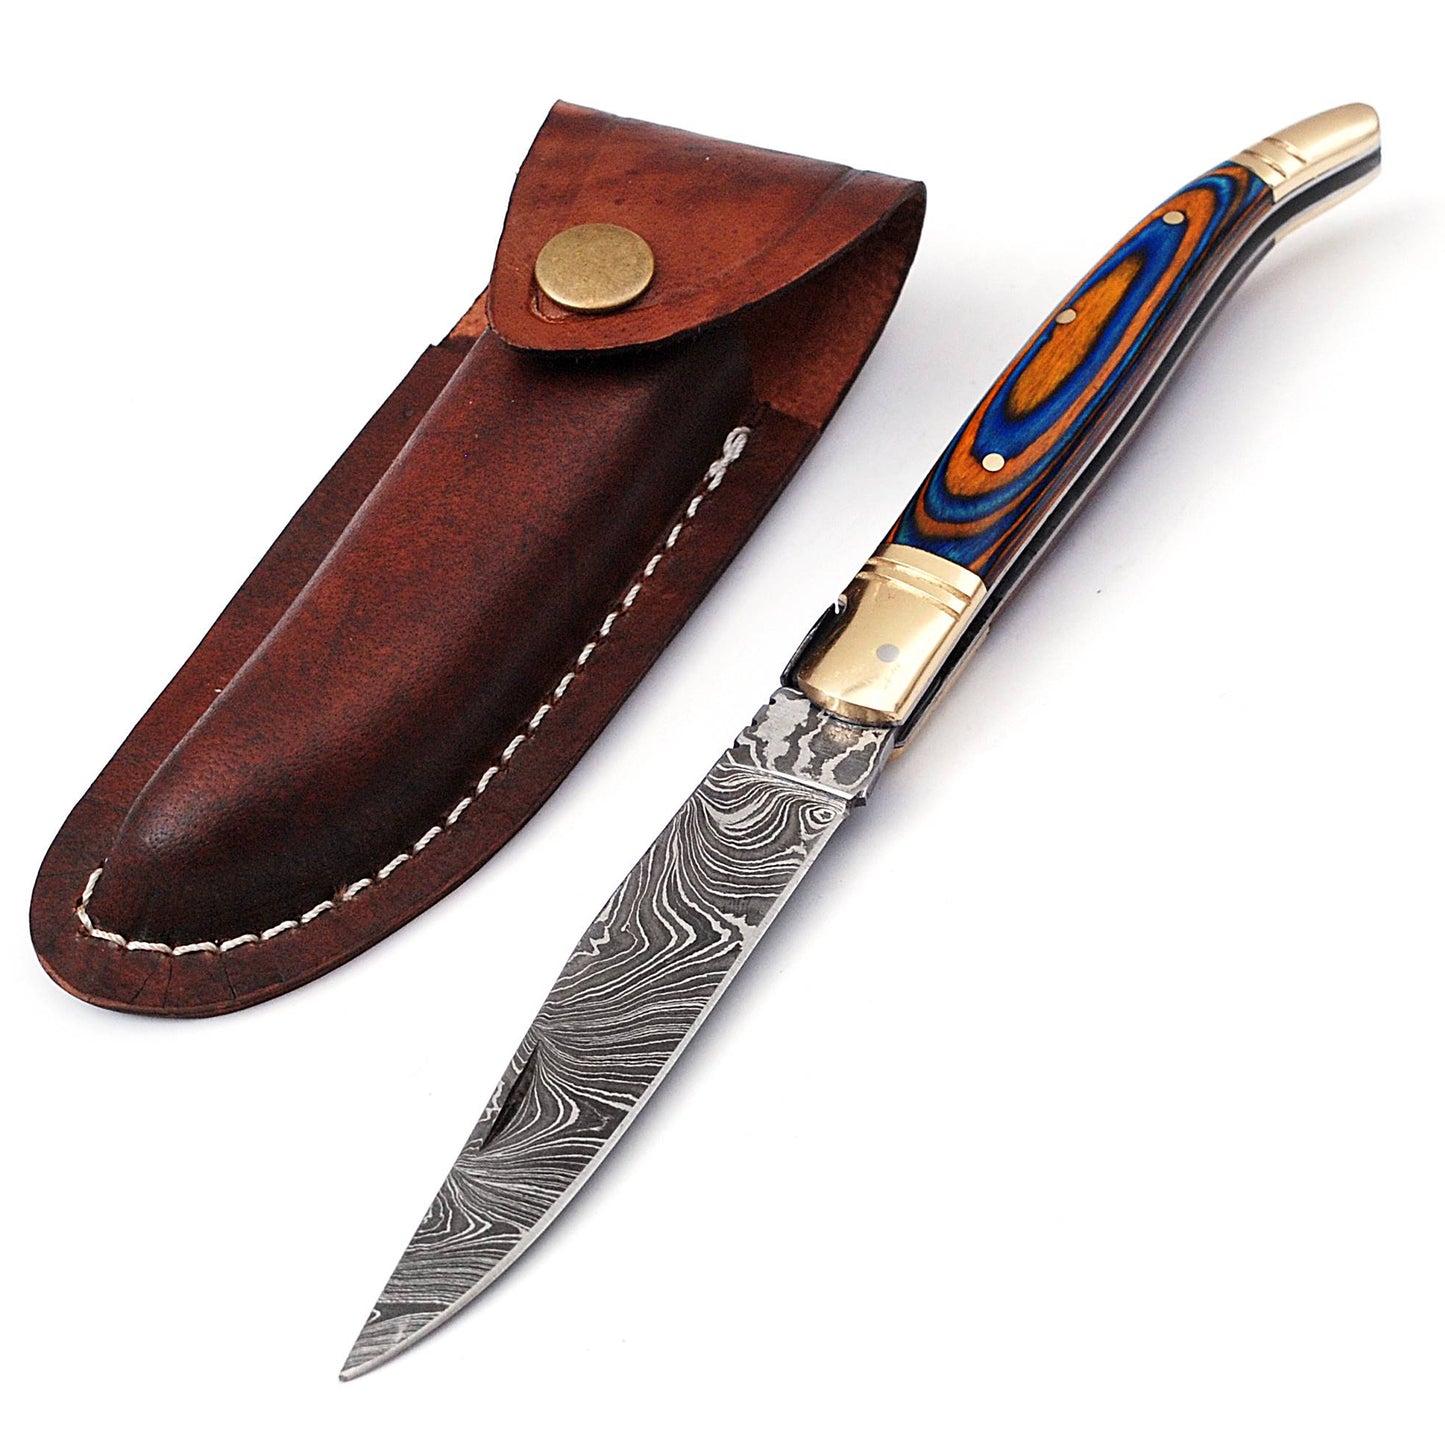 Laguiole Folding Damascus steel knife, 8.5" Long with 4" hand forged custom twist pattern Blade.Blue & Orange wood scale with brass bolster, Cow hide leather sheath included